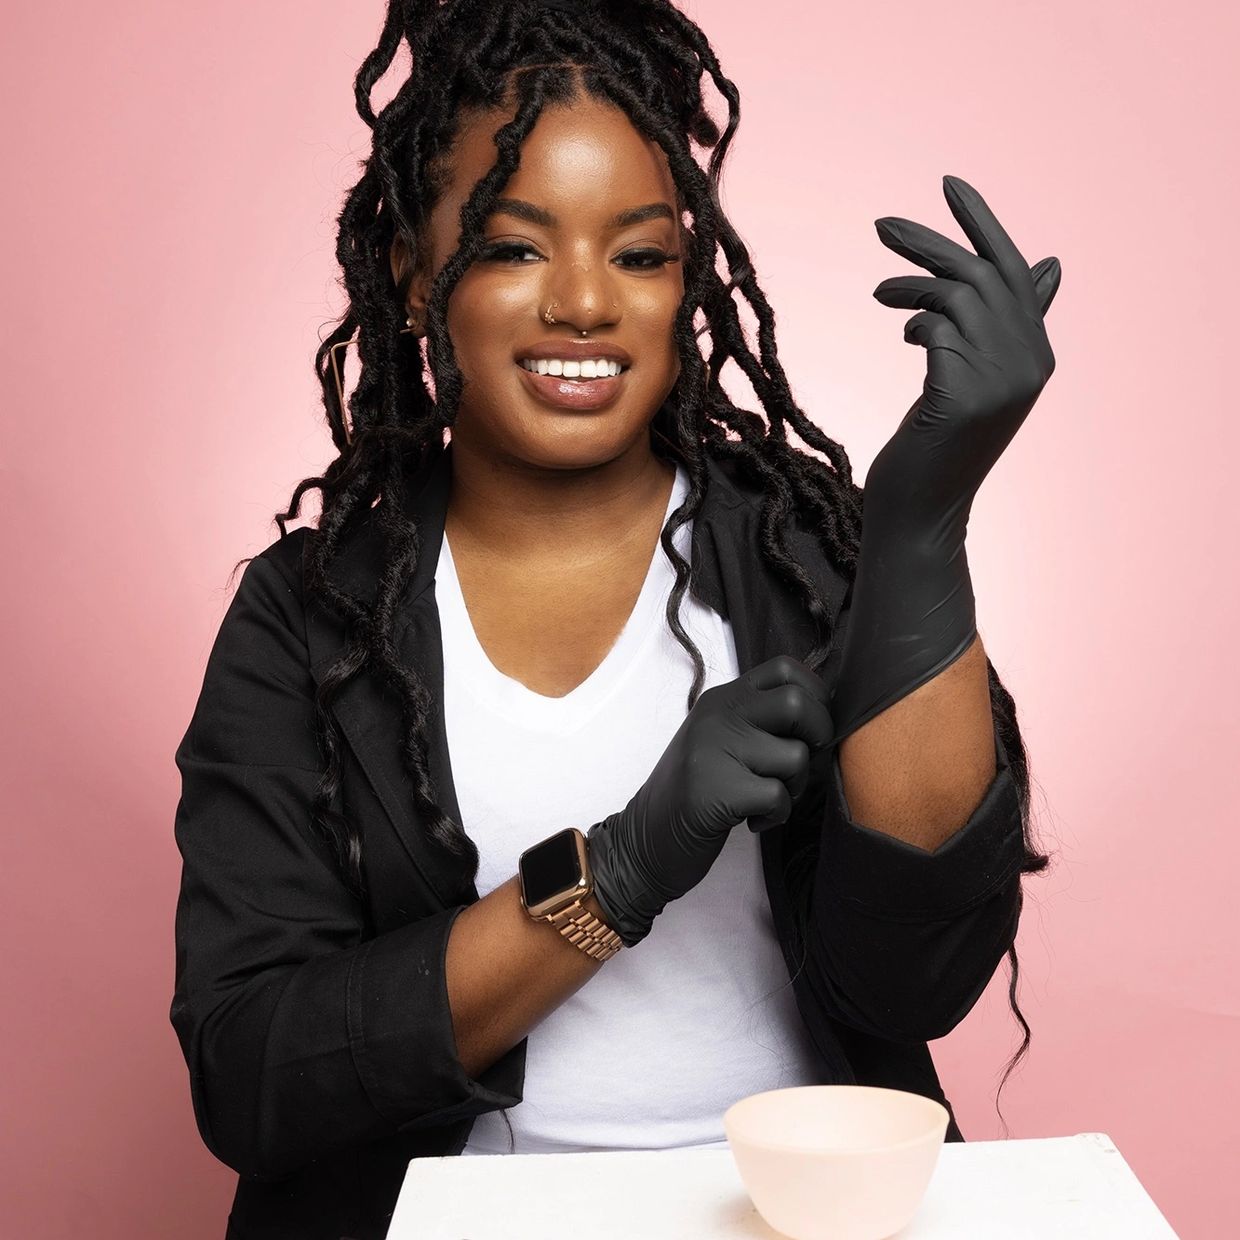 Bri the Esthi professional headshot posing with facial implements and gloves against pink background